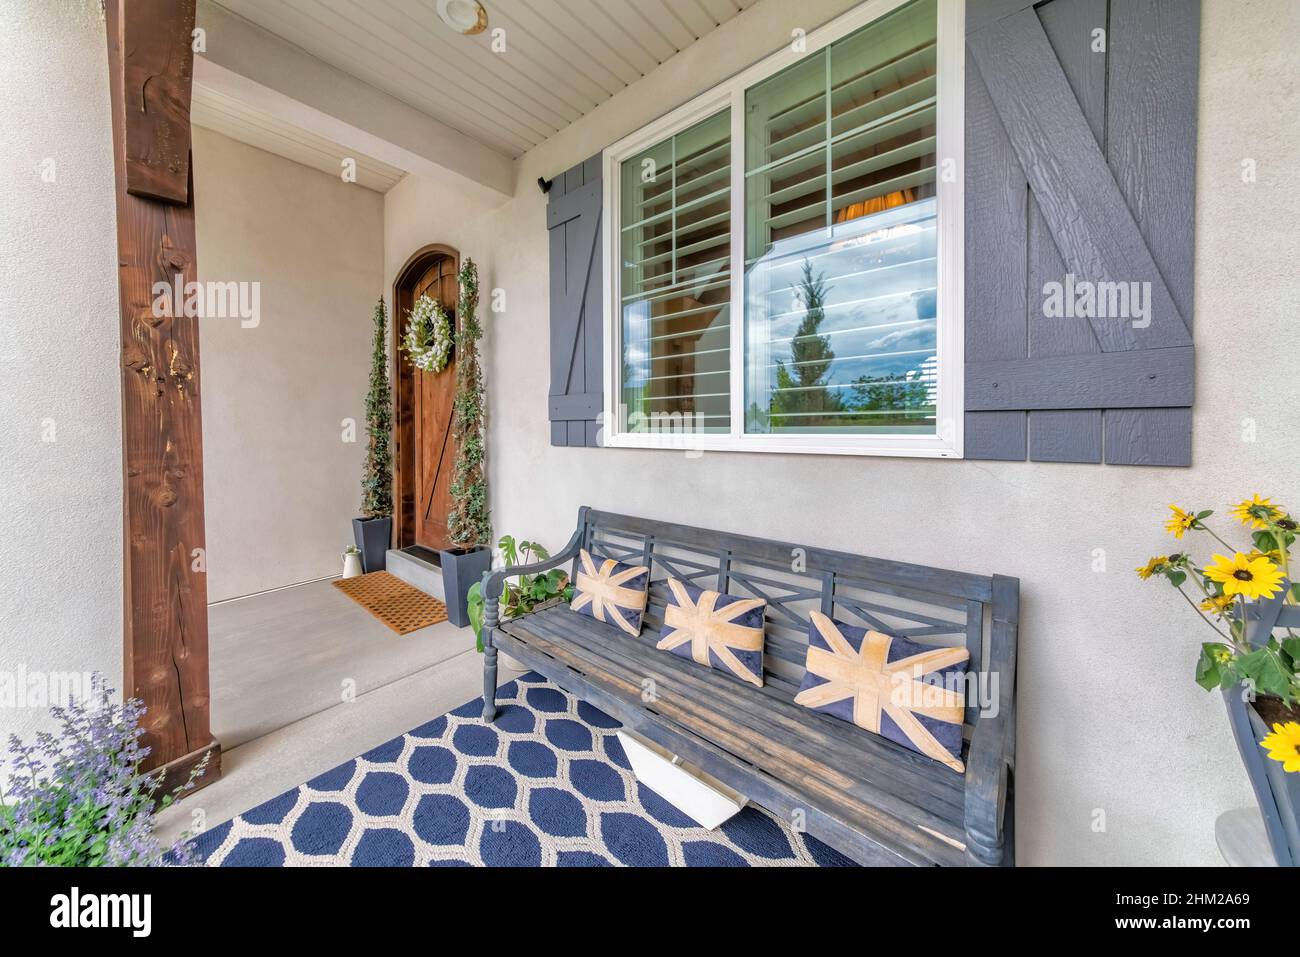 Decorated front porch with bench, flowers and carpet Stock Photo